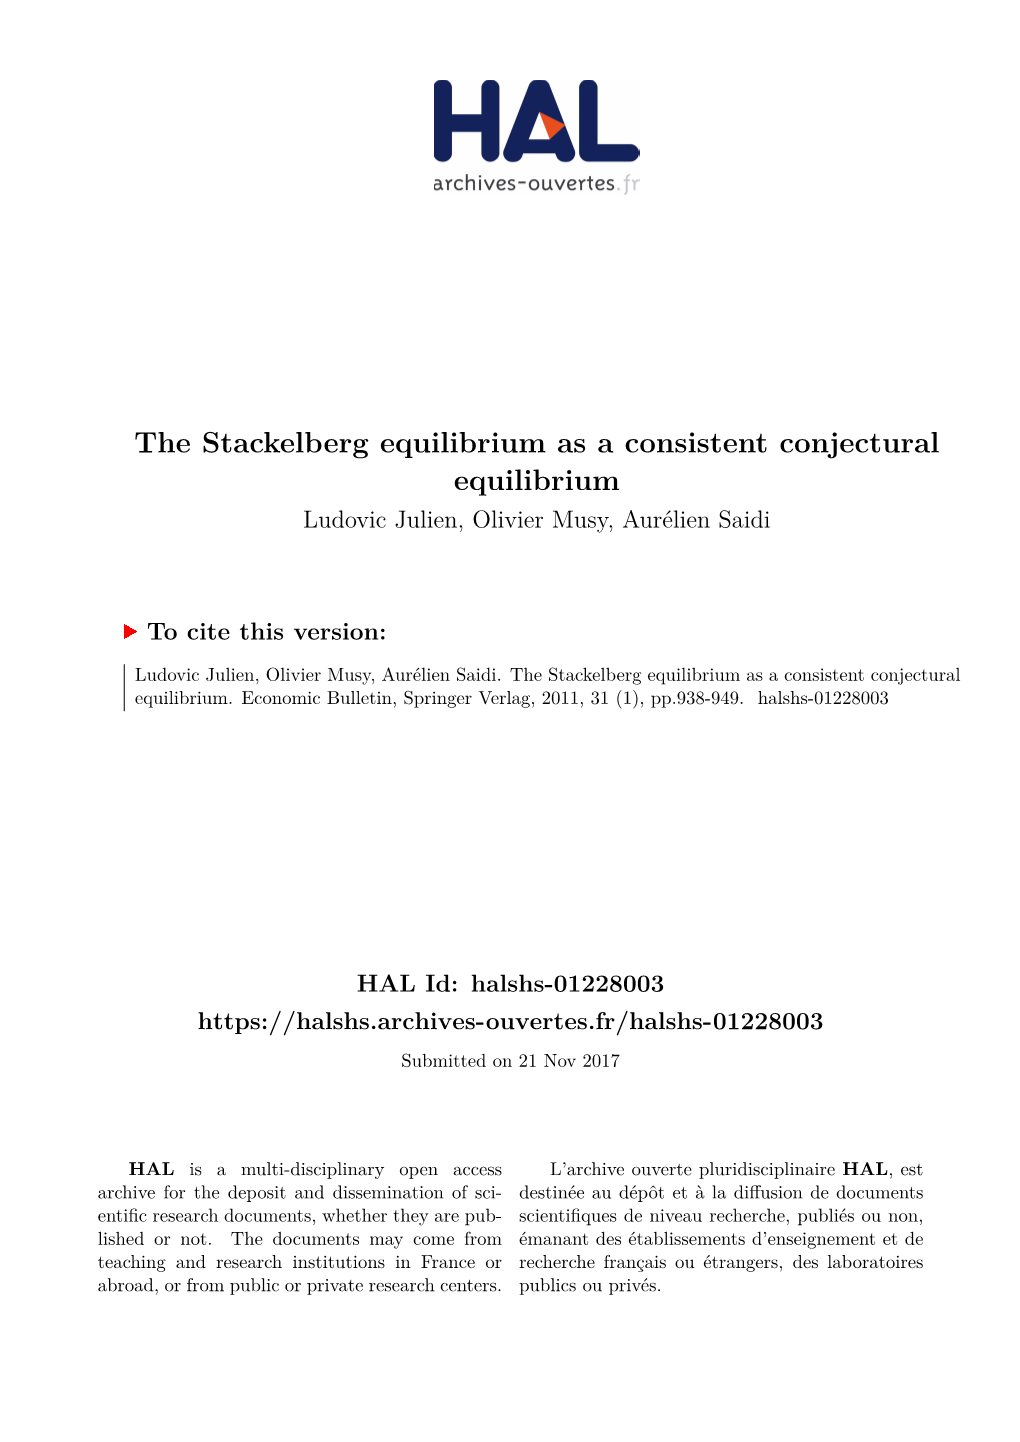 The Stackelberg Equilibrium As a Consistent Conjectural Equilibrium Ludovic Julien, Olivier Musy, Aurélien Saidi